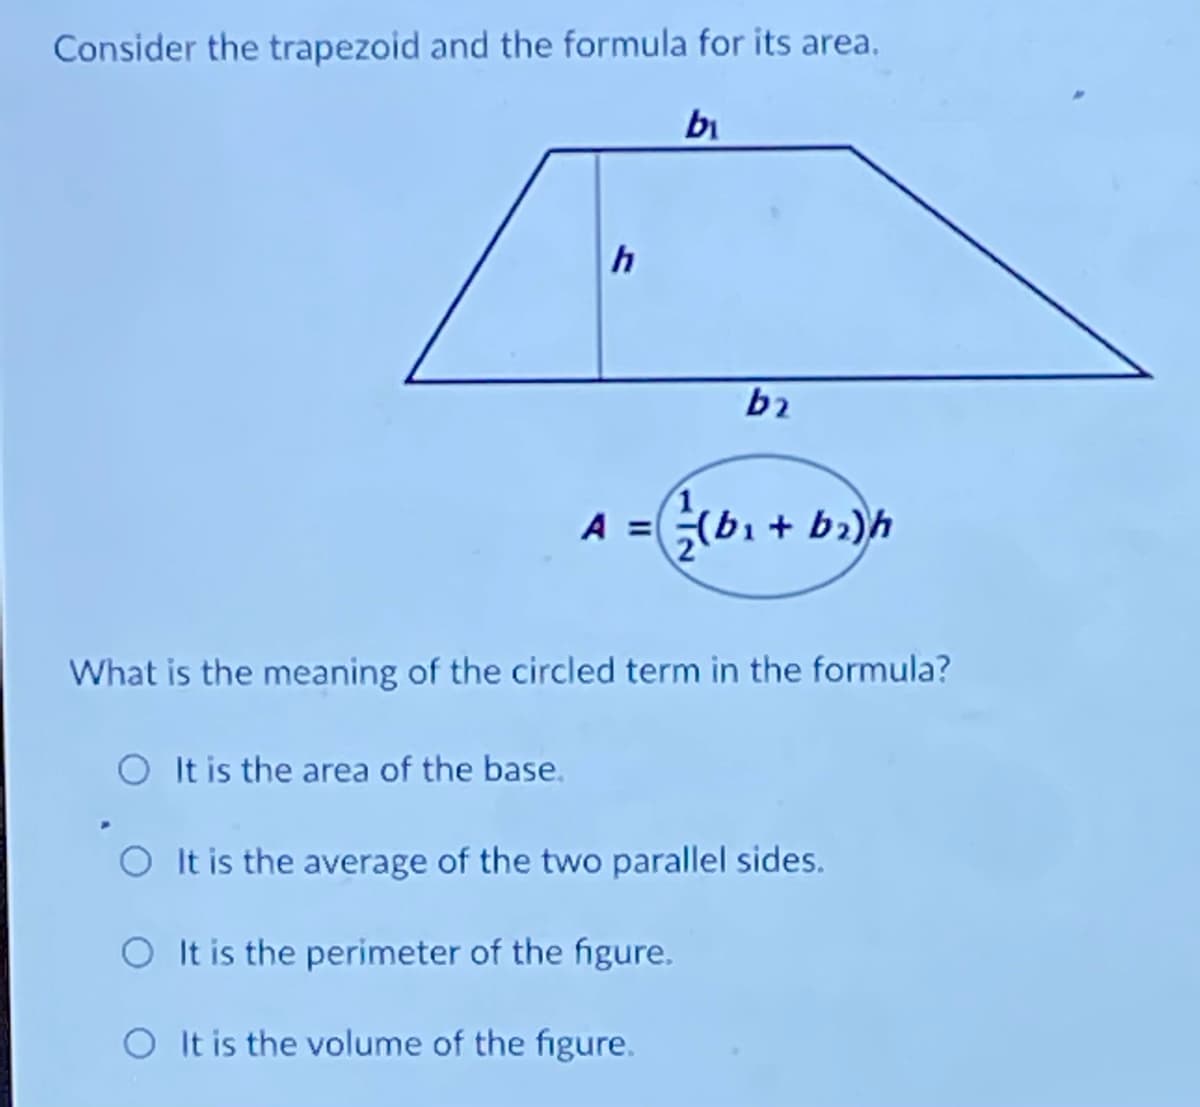 Consider the trapezoid and the formula for its area,
bi
A =(bi + bi)h
What is the meaning of the circled term in the formula?
O It is the area of the base.
It is the average of the two parallel sides.
It is the perimeter of the figure.
O It is the volume of the figure.
